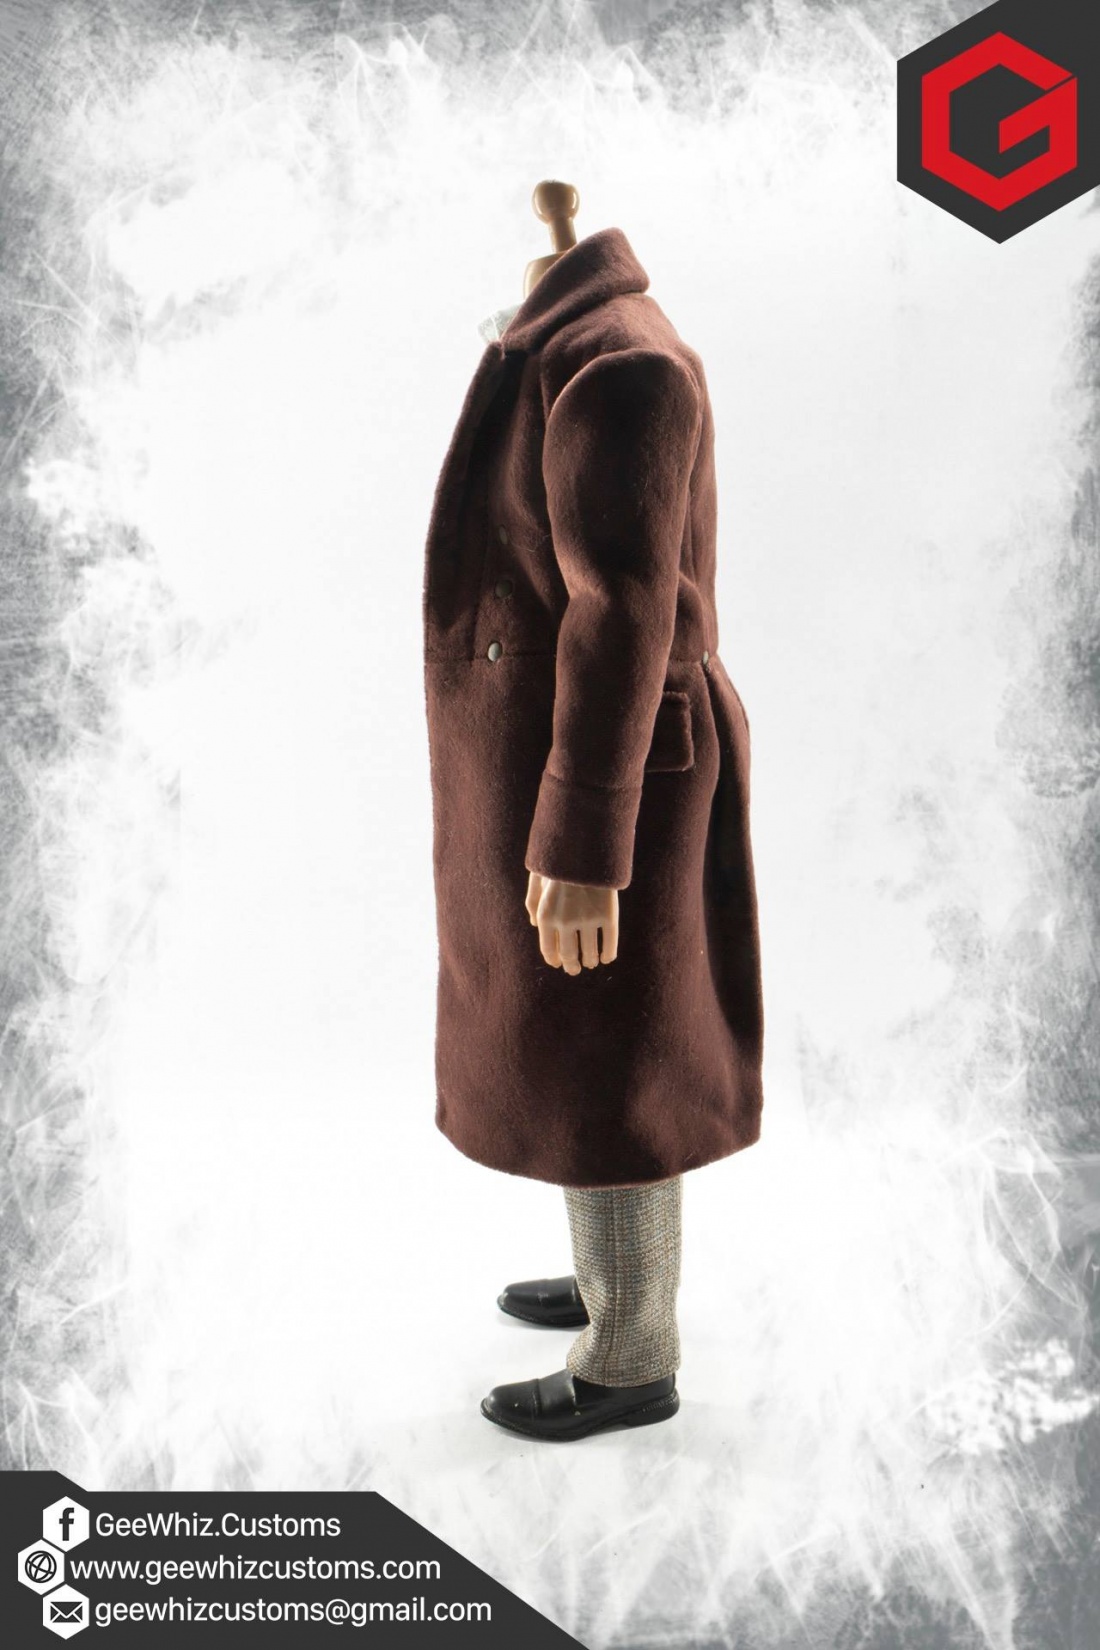 Geewhiz Customs: The Fourth Doctor